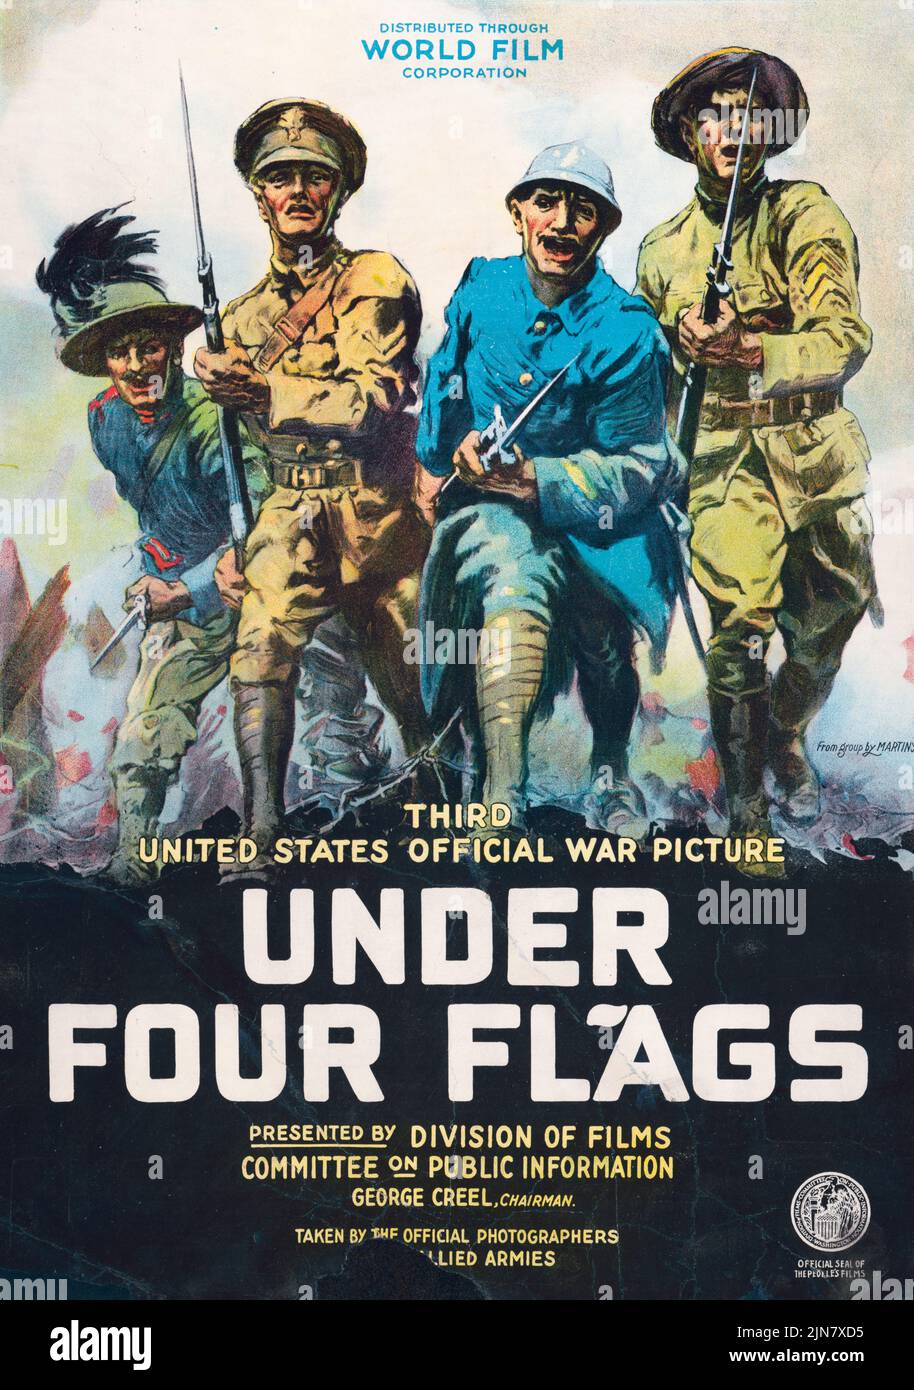 Under Four Flags, United States Official War Picture, Division of Films Committee on Public Information (1917) World War I era film poster by Philip Martiny Stock Photo